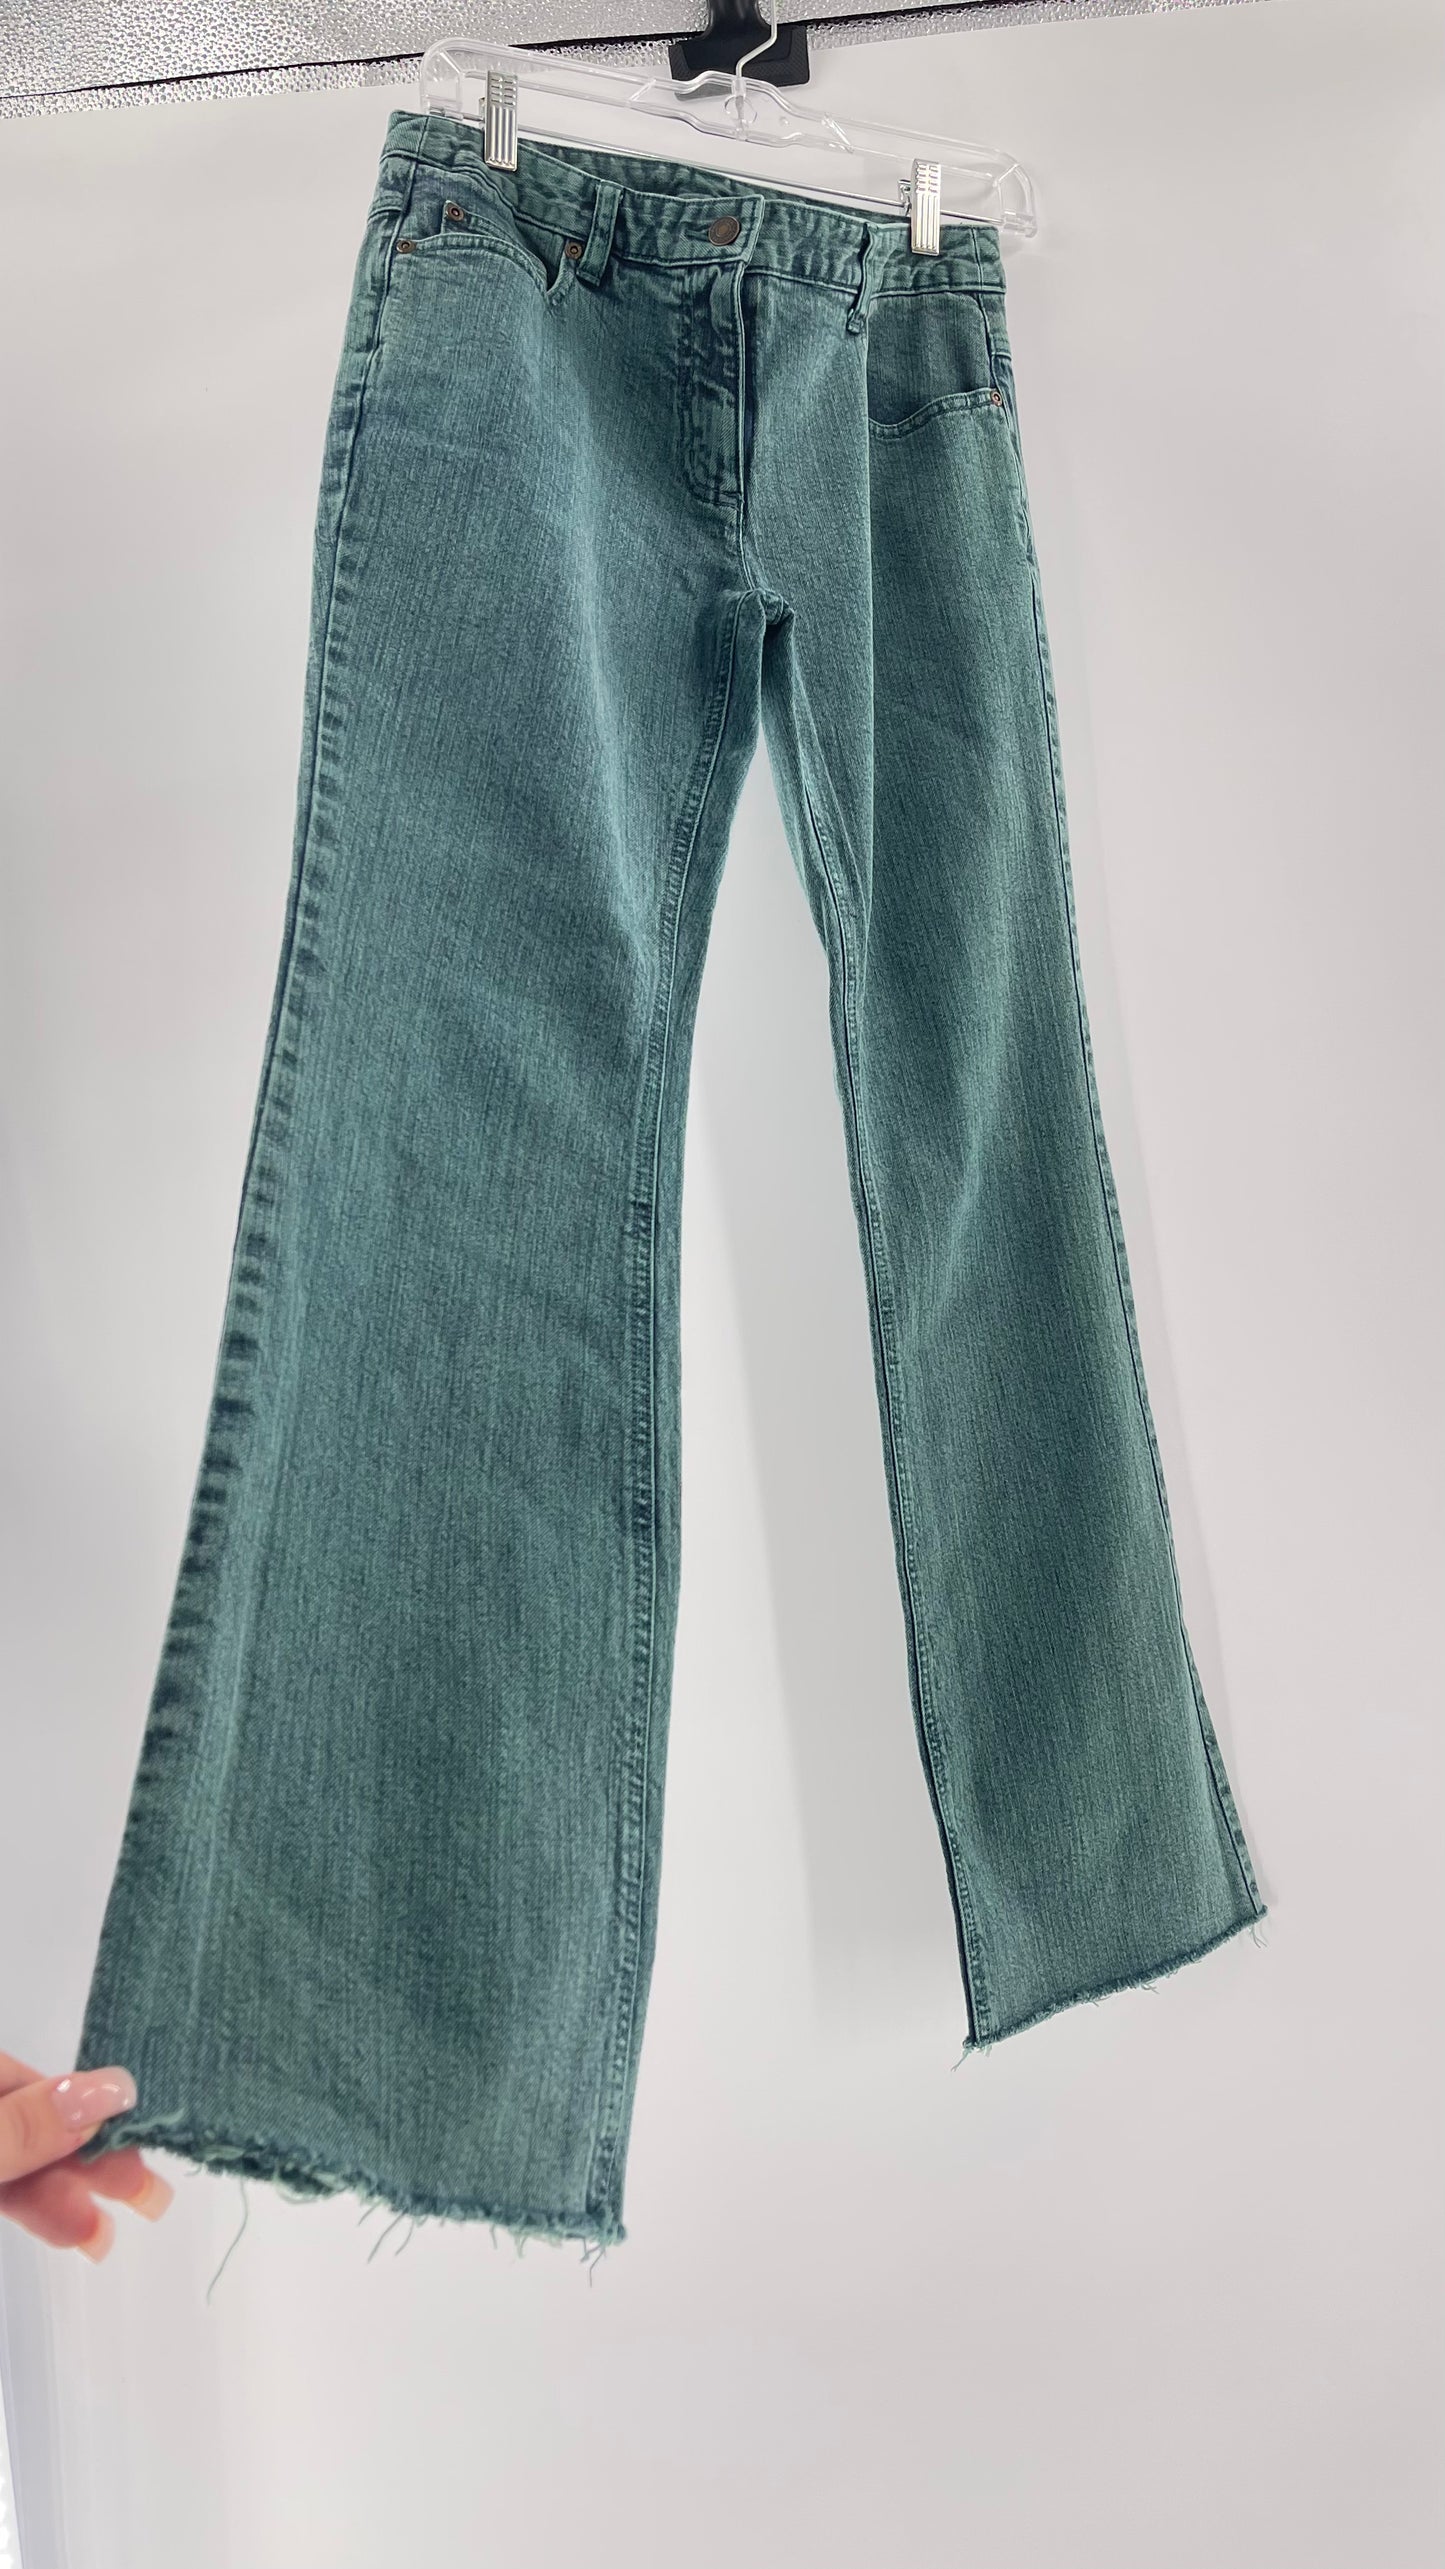 Jeanology Mid Rise Faded Teal Straight Legs (4)